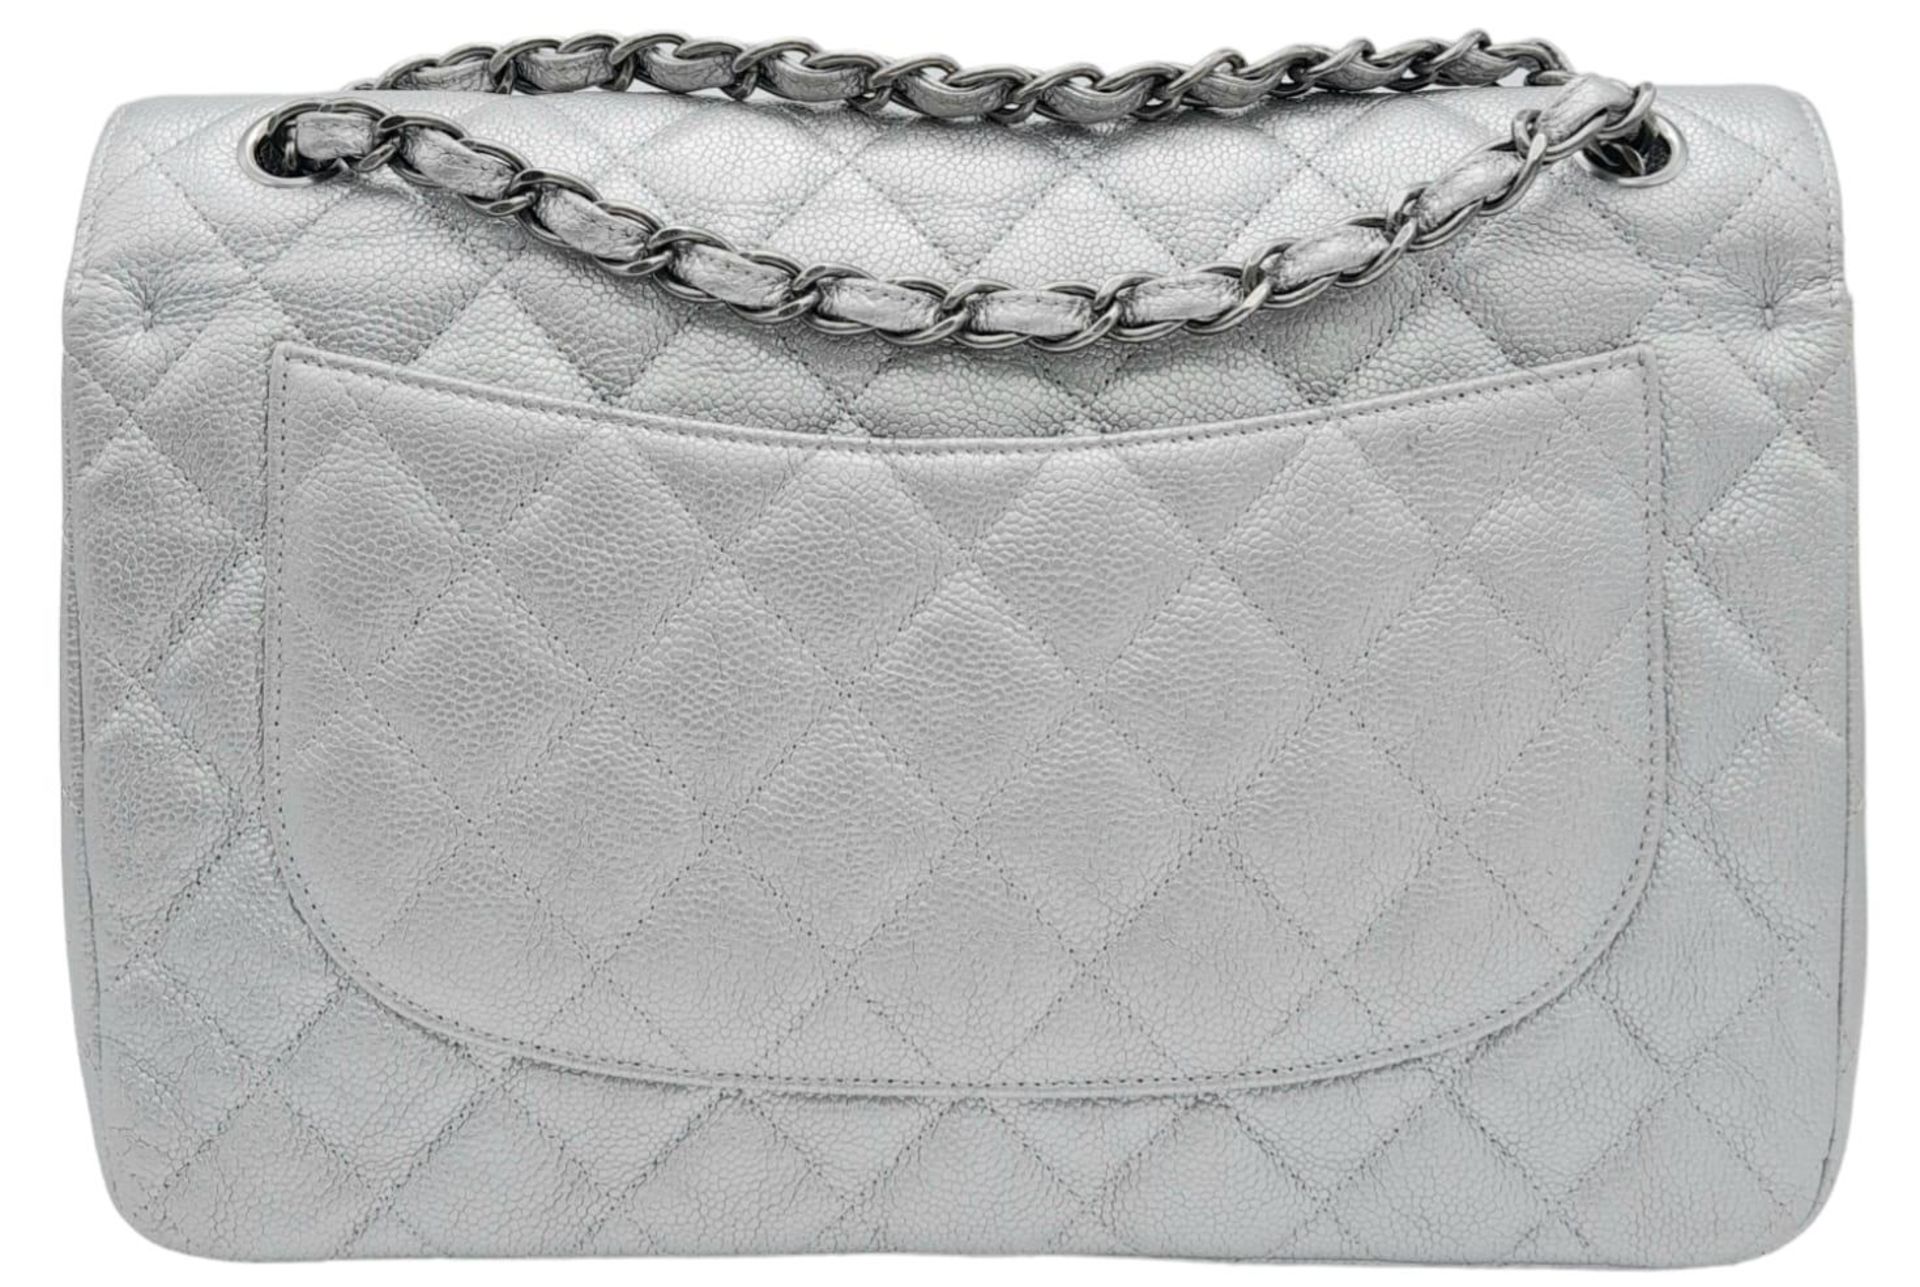 A Chanel Metallic Silver Double Flap Jumbo Bag. Quilted caviar leather. Silver tone hardware. Double - Image 5 of 12